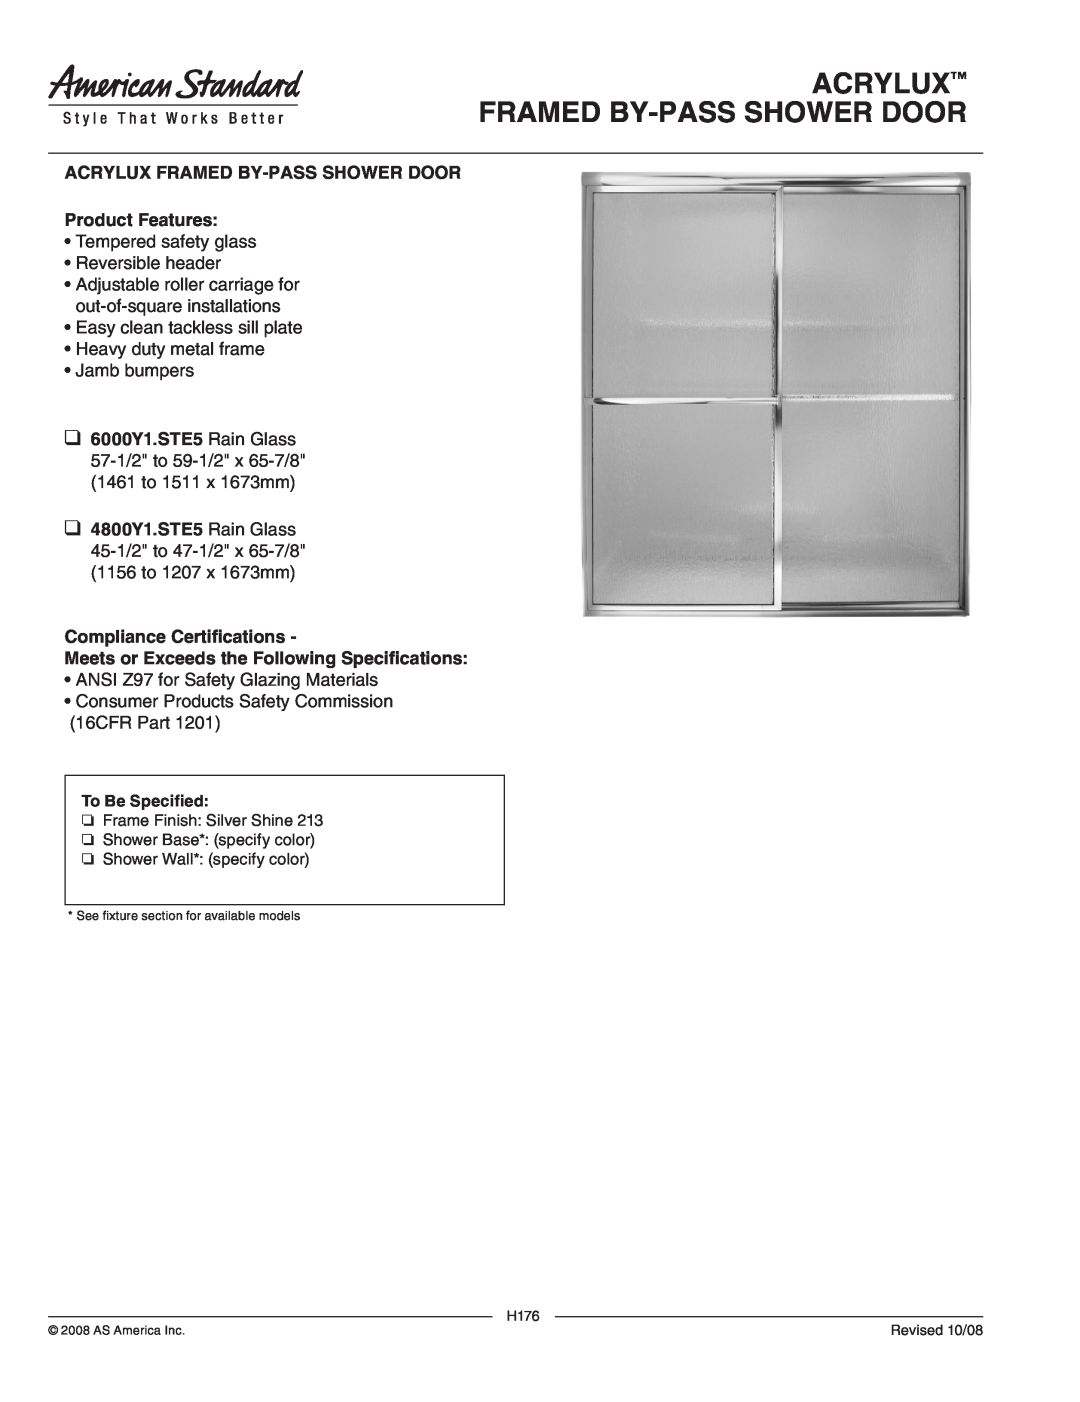 American Standard manual Acrylux Framed By-Pass Shower Door 